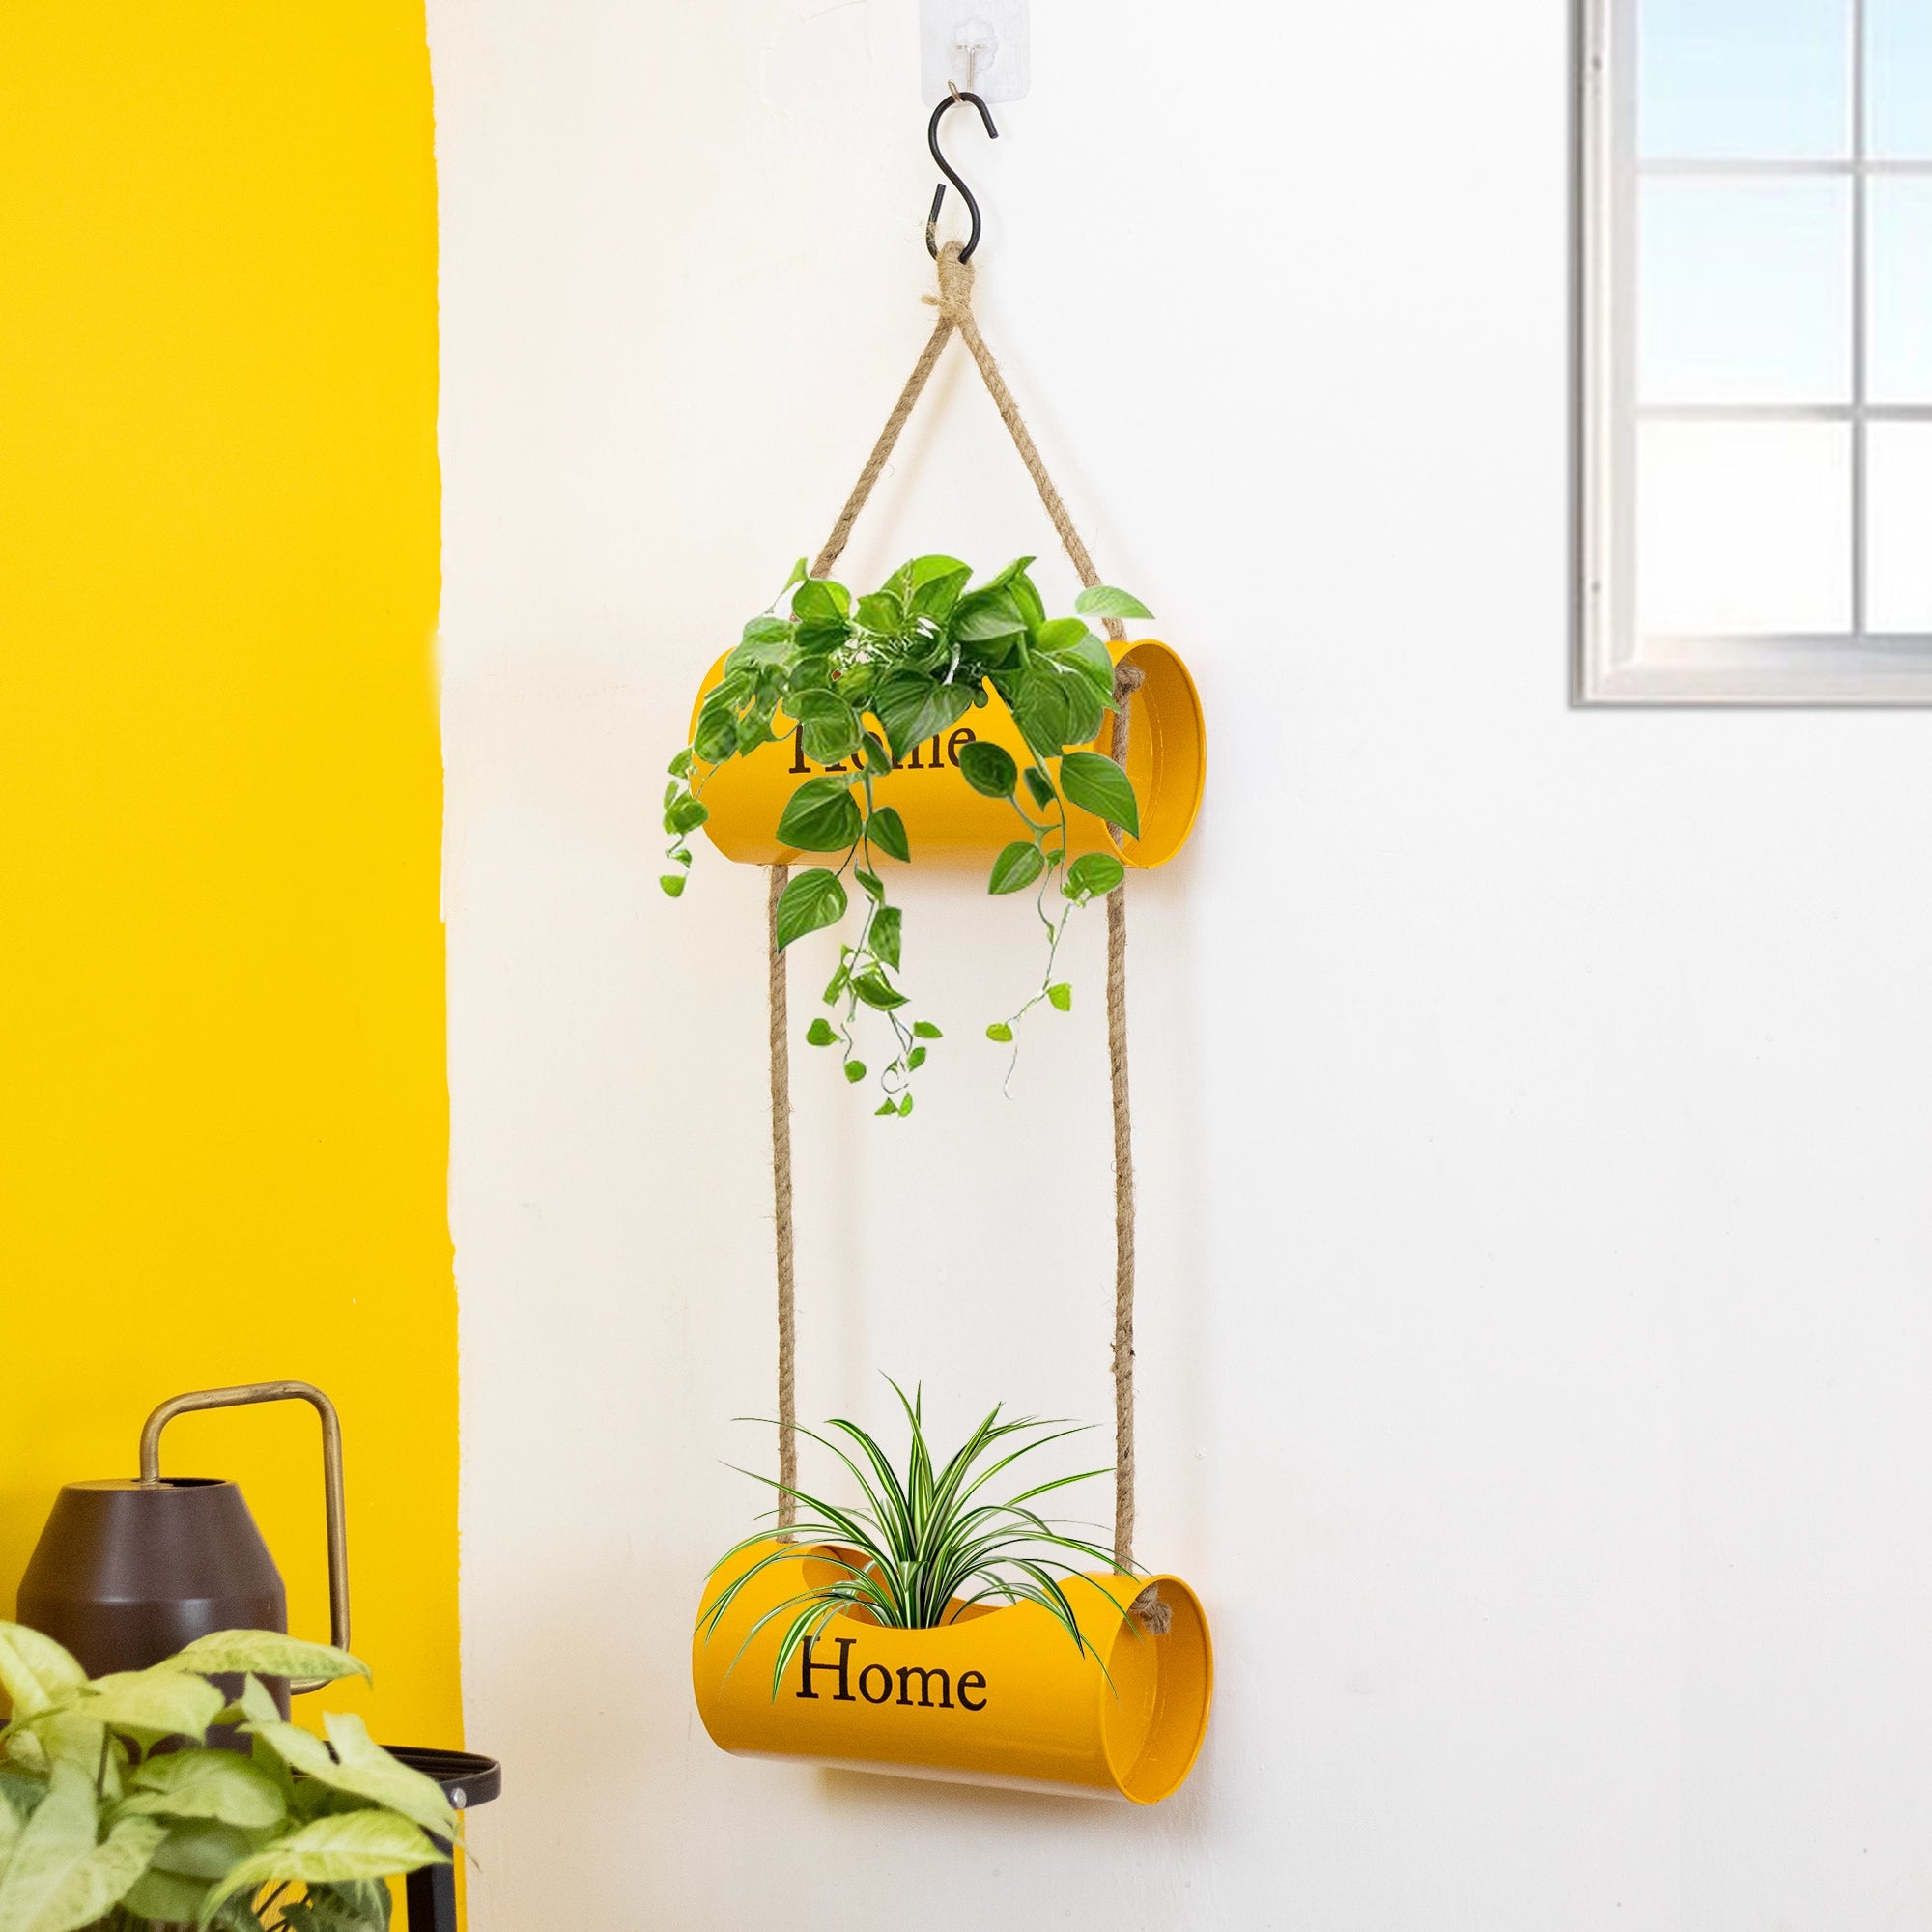 Two-Tiered Indoor Hanging Metal Planter with Jute Ropes (Yellow) Hanging Decor Urban Plant 